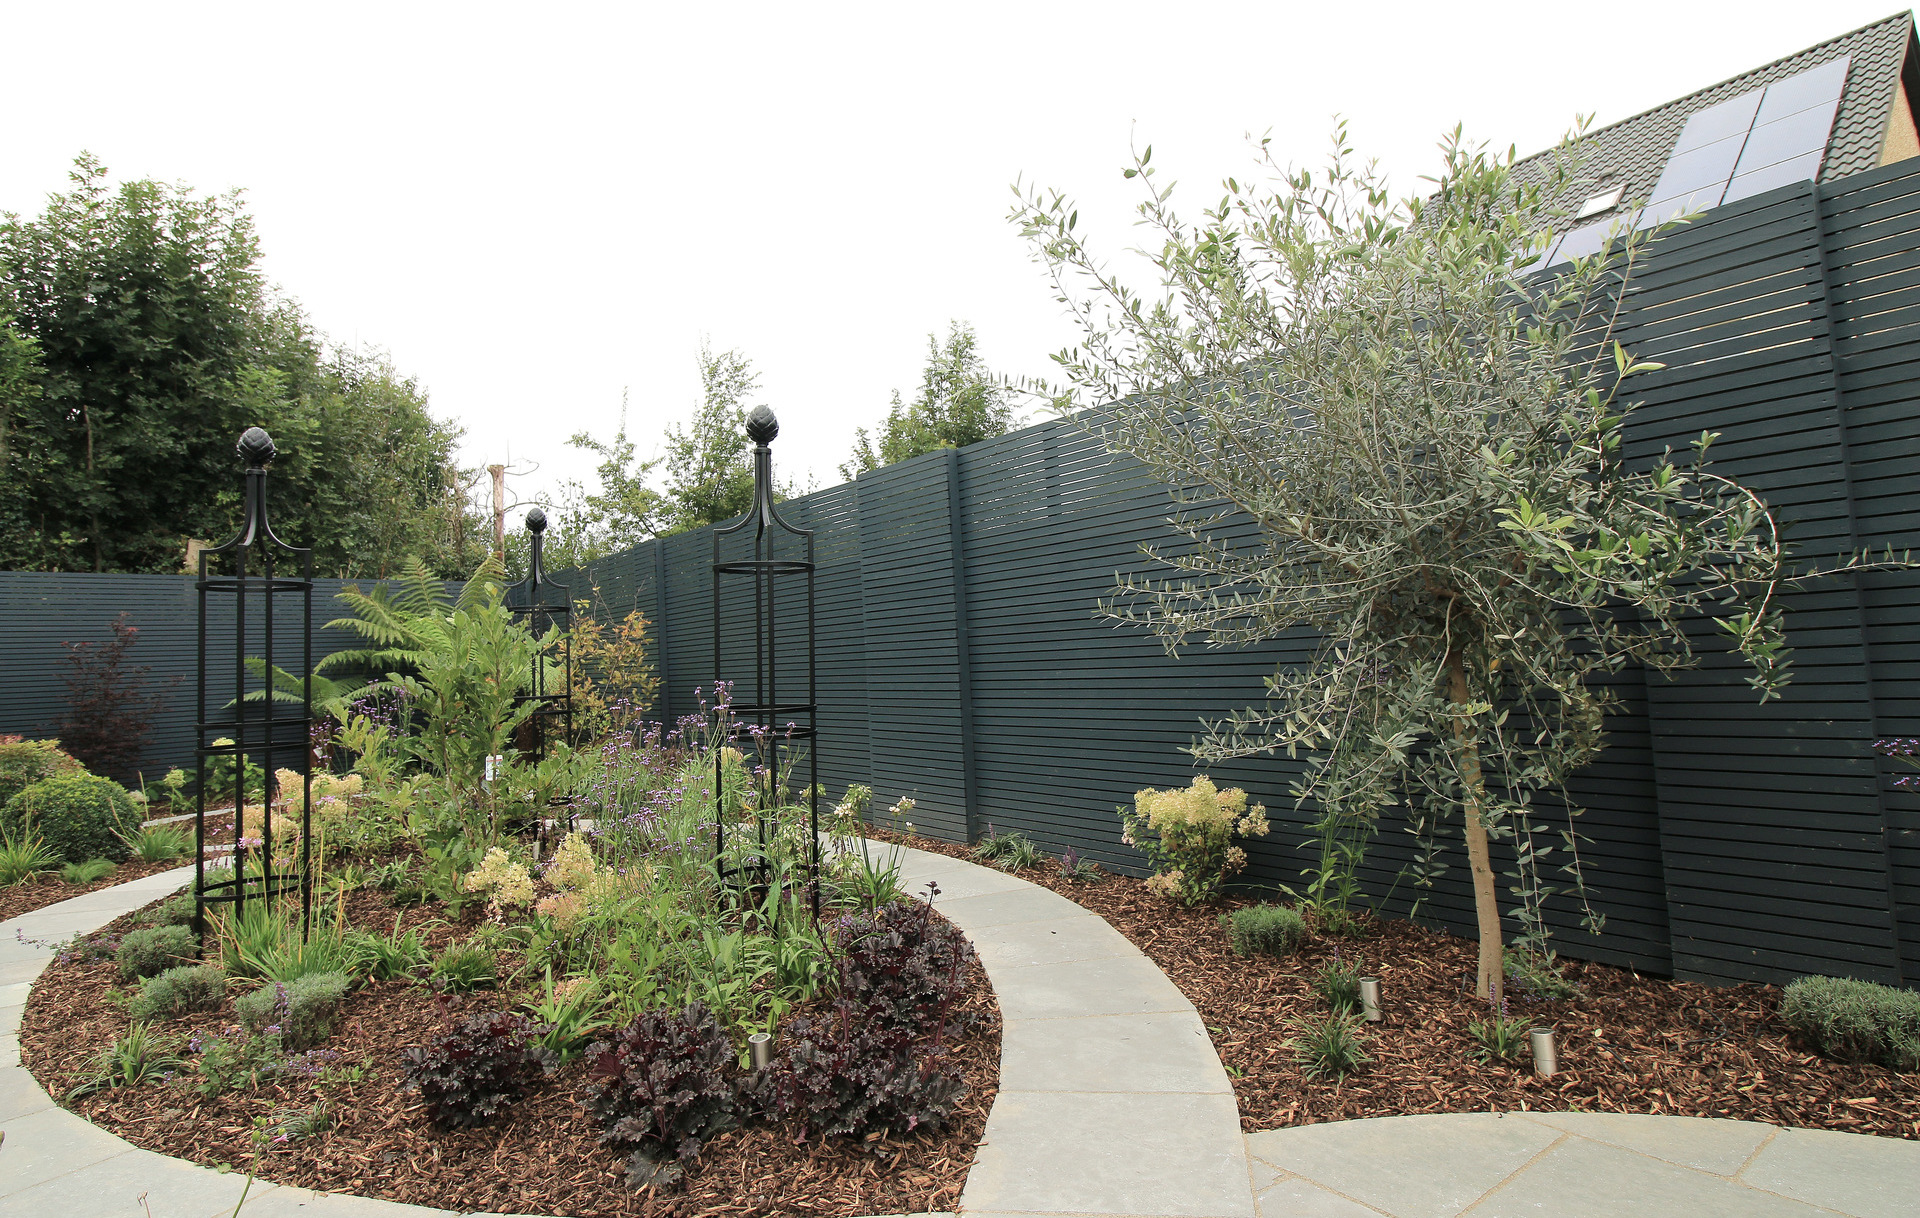 Family Garden Garden Design & Landscaping project in Rathcoole, Dublin 24 provides a host of visual features including Rose Obelisks by Classic Garden Elements, custom made horizontal timber slatted fencing, Limestone patios & paving | Design & Landscaping by Owen Chubb Garden Landscapers